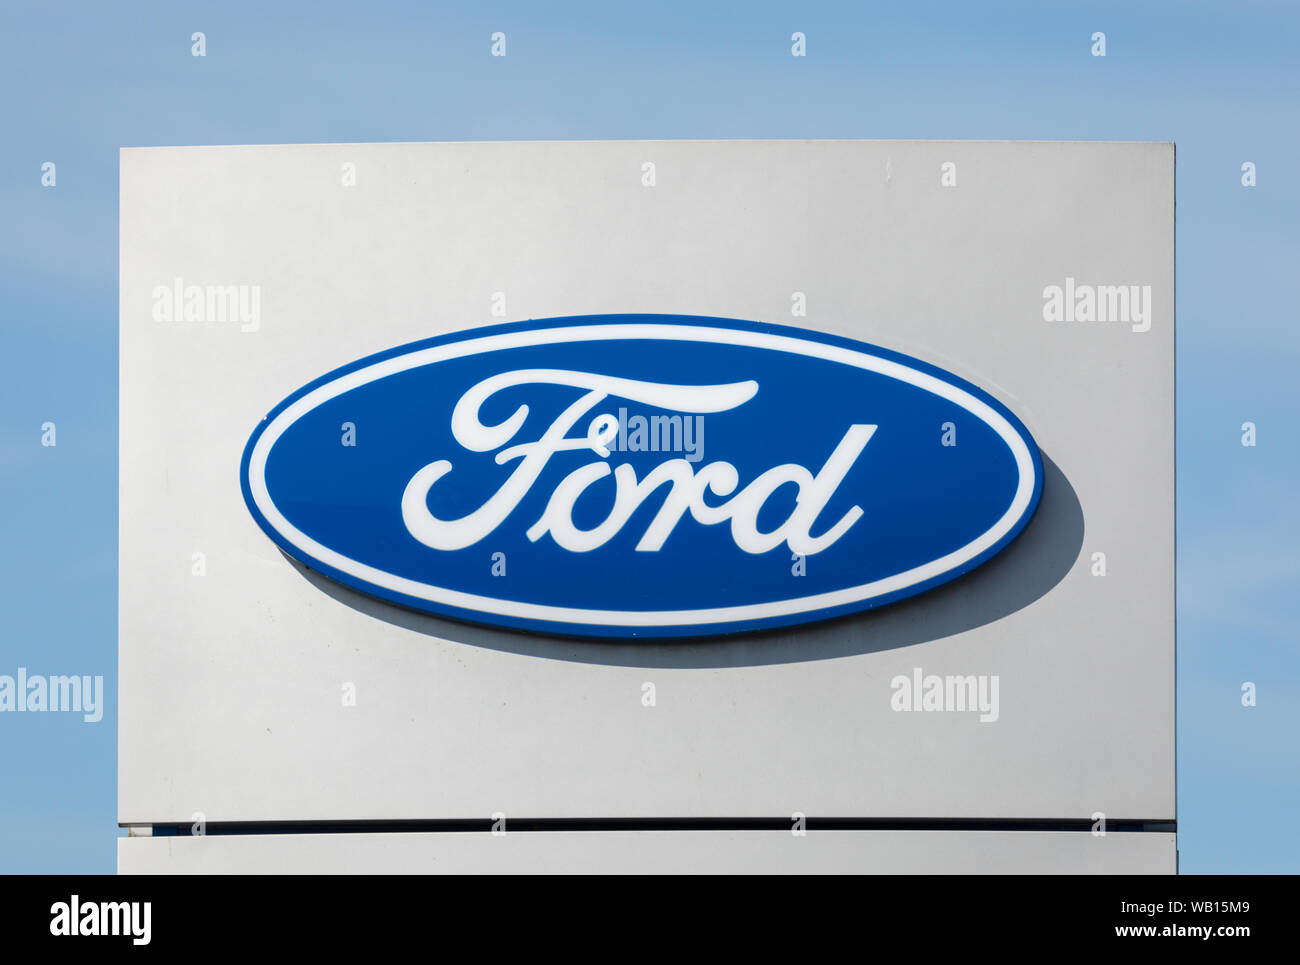 Stade, Germany - August 22, 2019: Logo on pole identifying a Ford Motor Company dealership Stock Photo